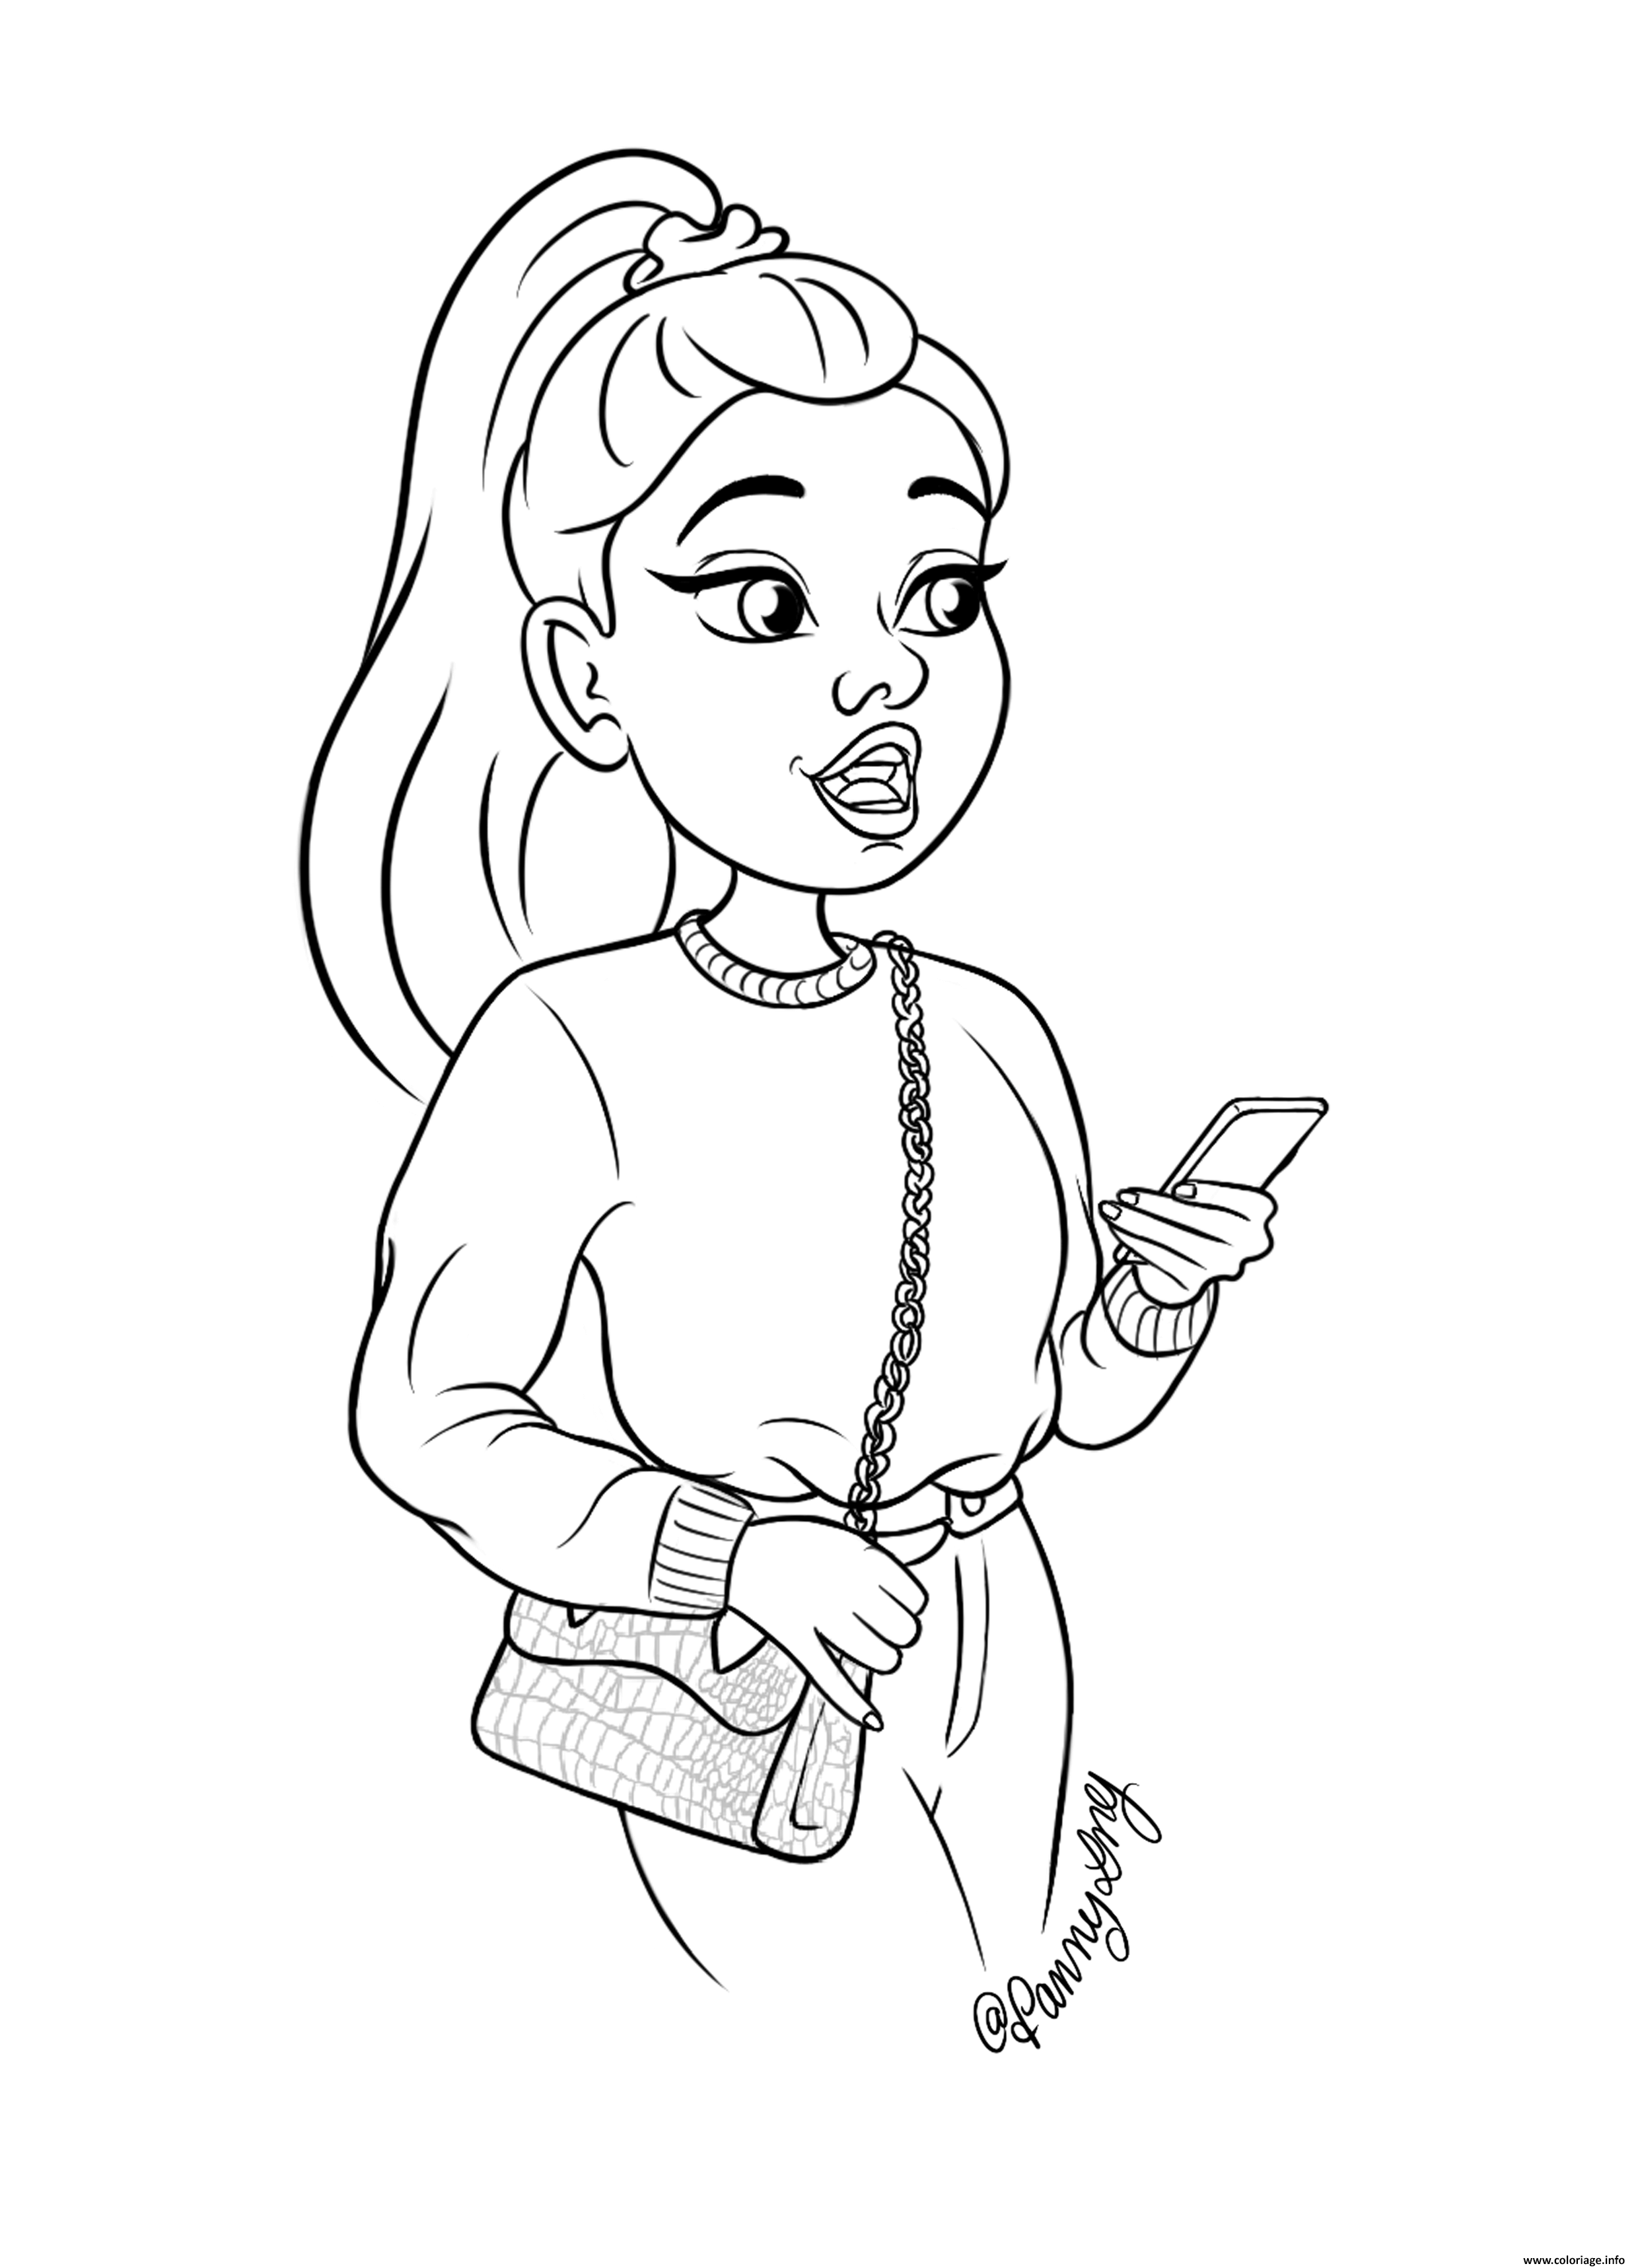 Coloriage fille ado swag cool mode - JeColorie.com